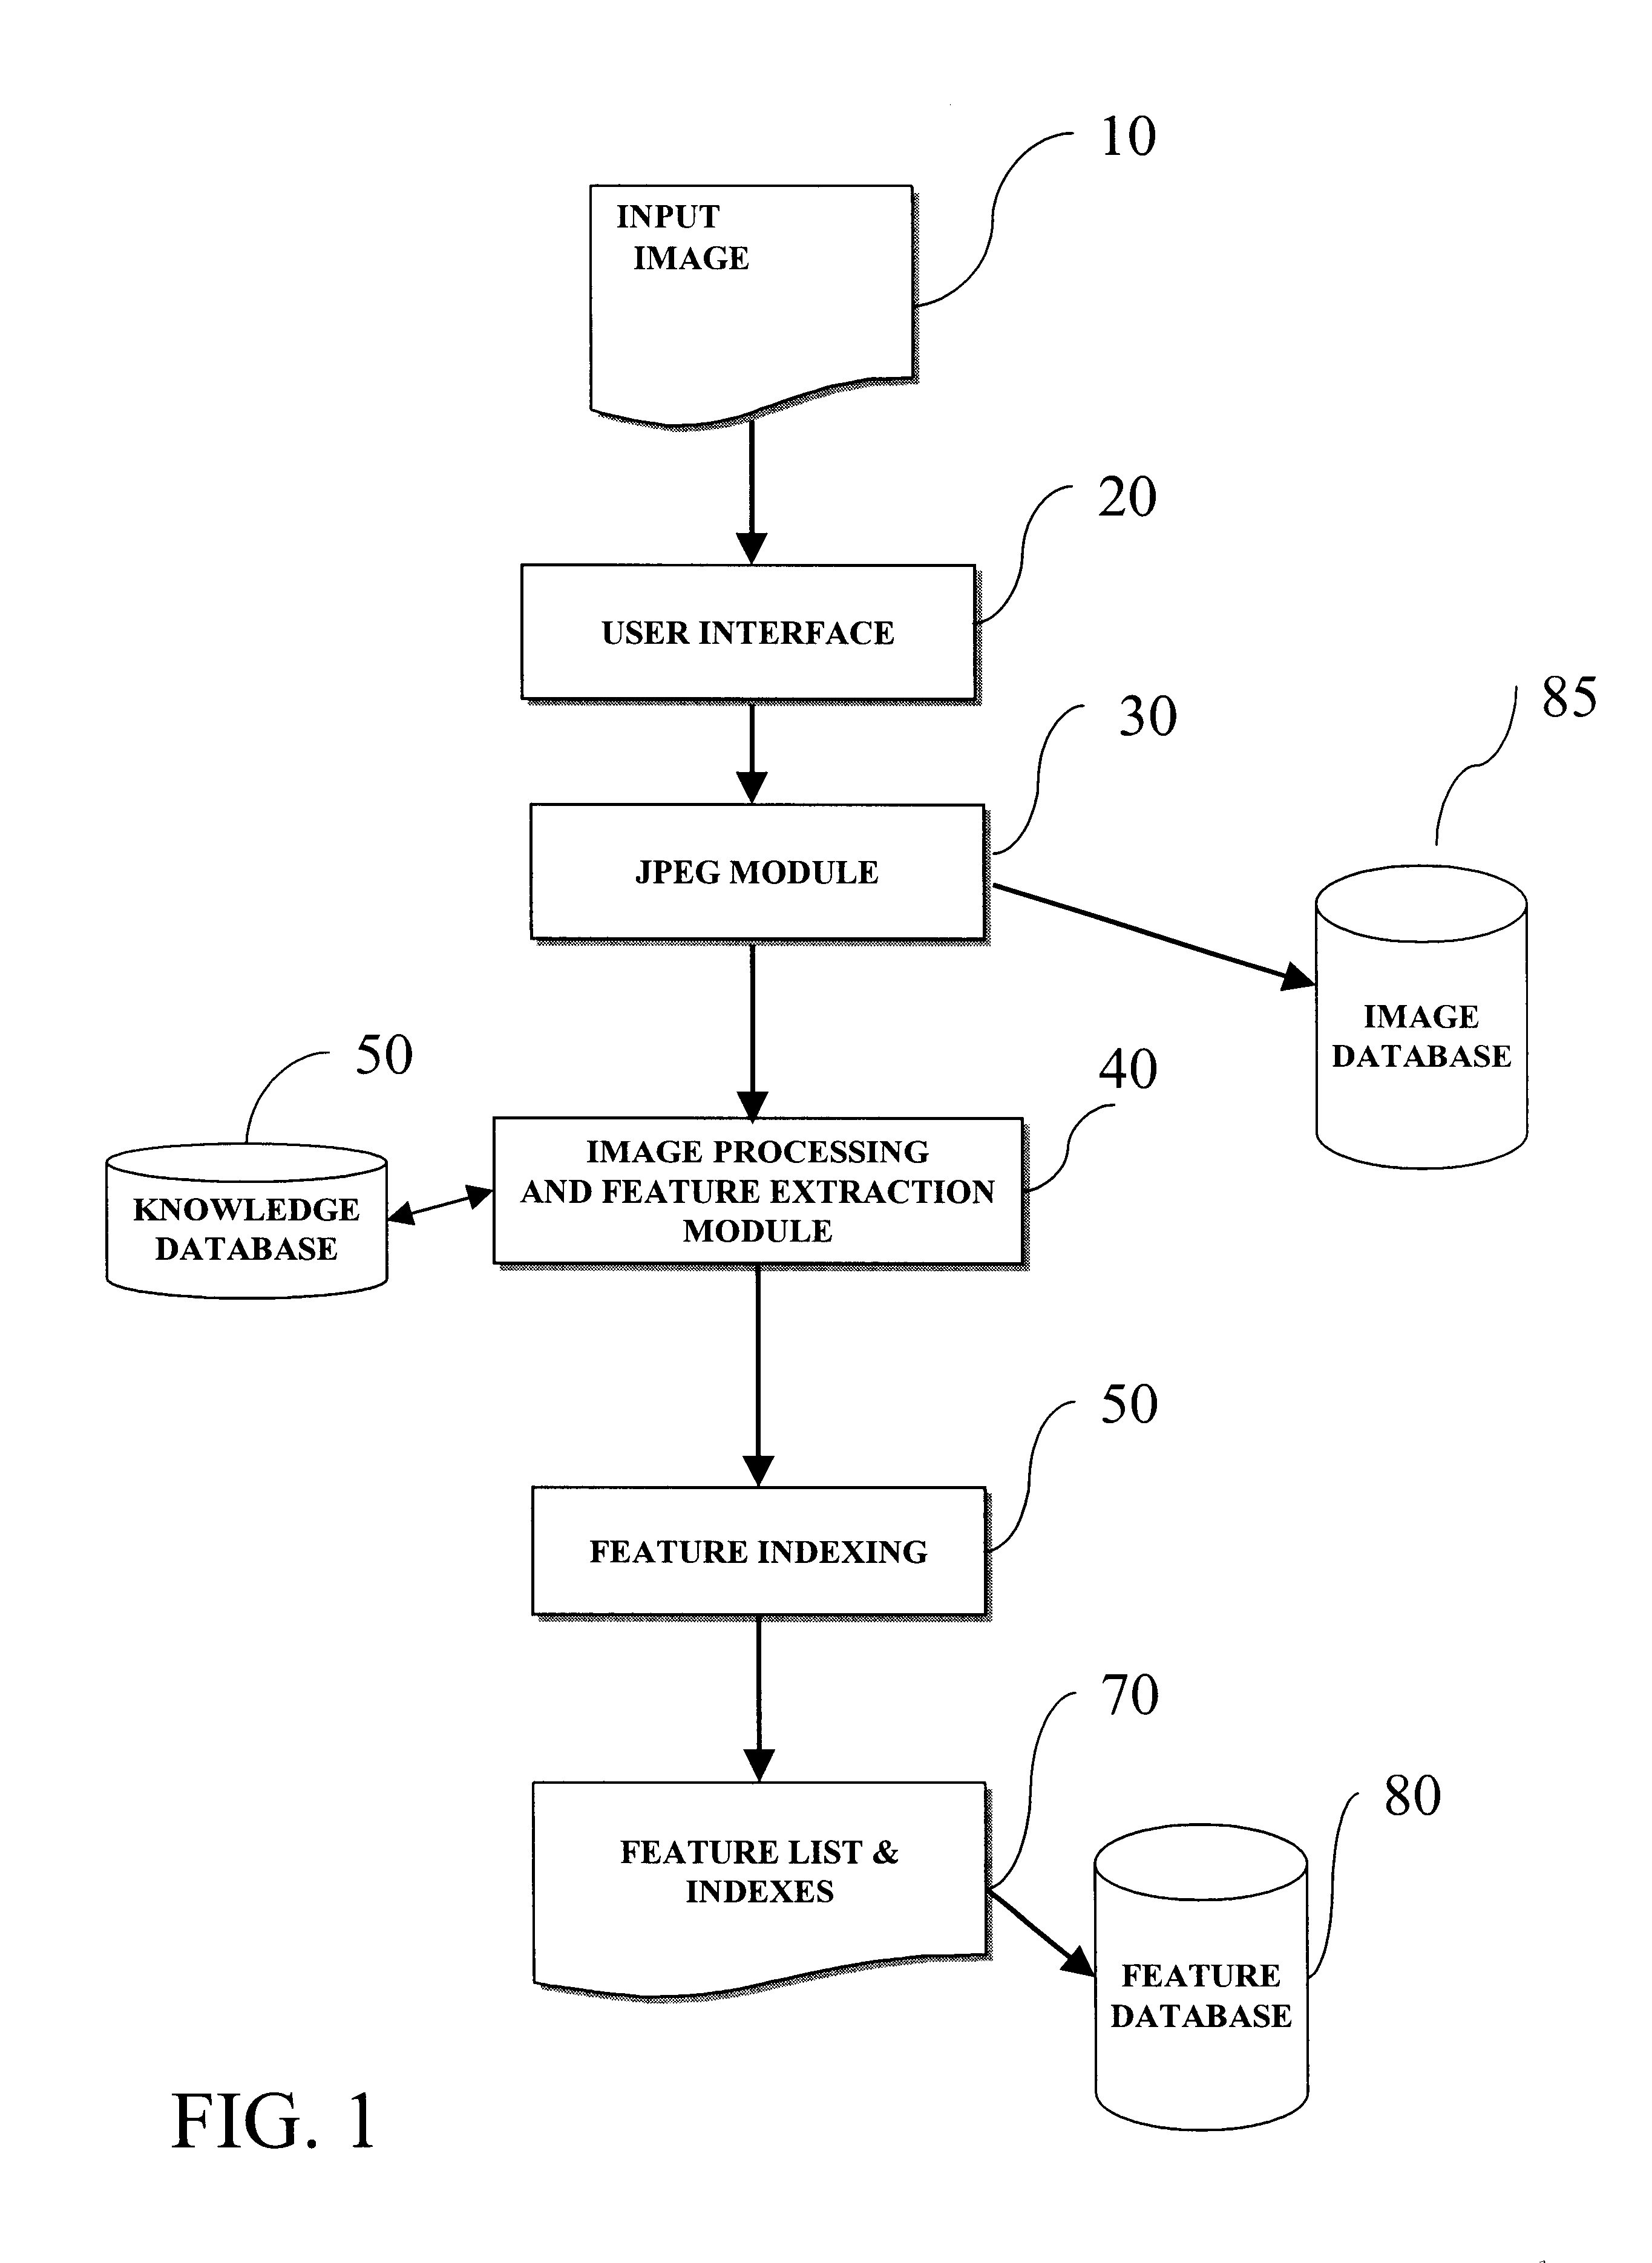 Method for computerized indexing and retrieval of digital images based on spatial color distribution